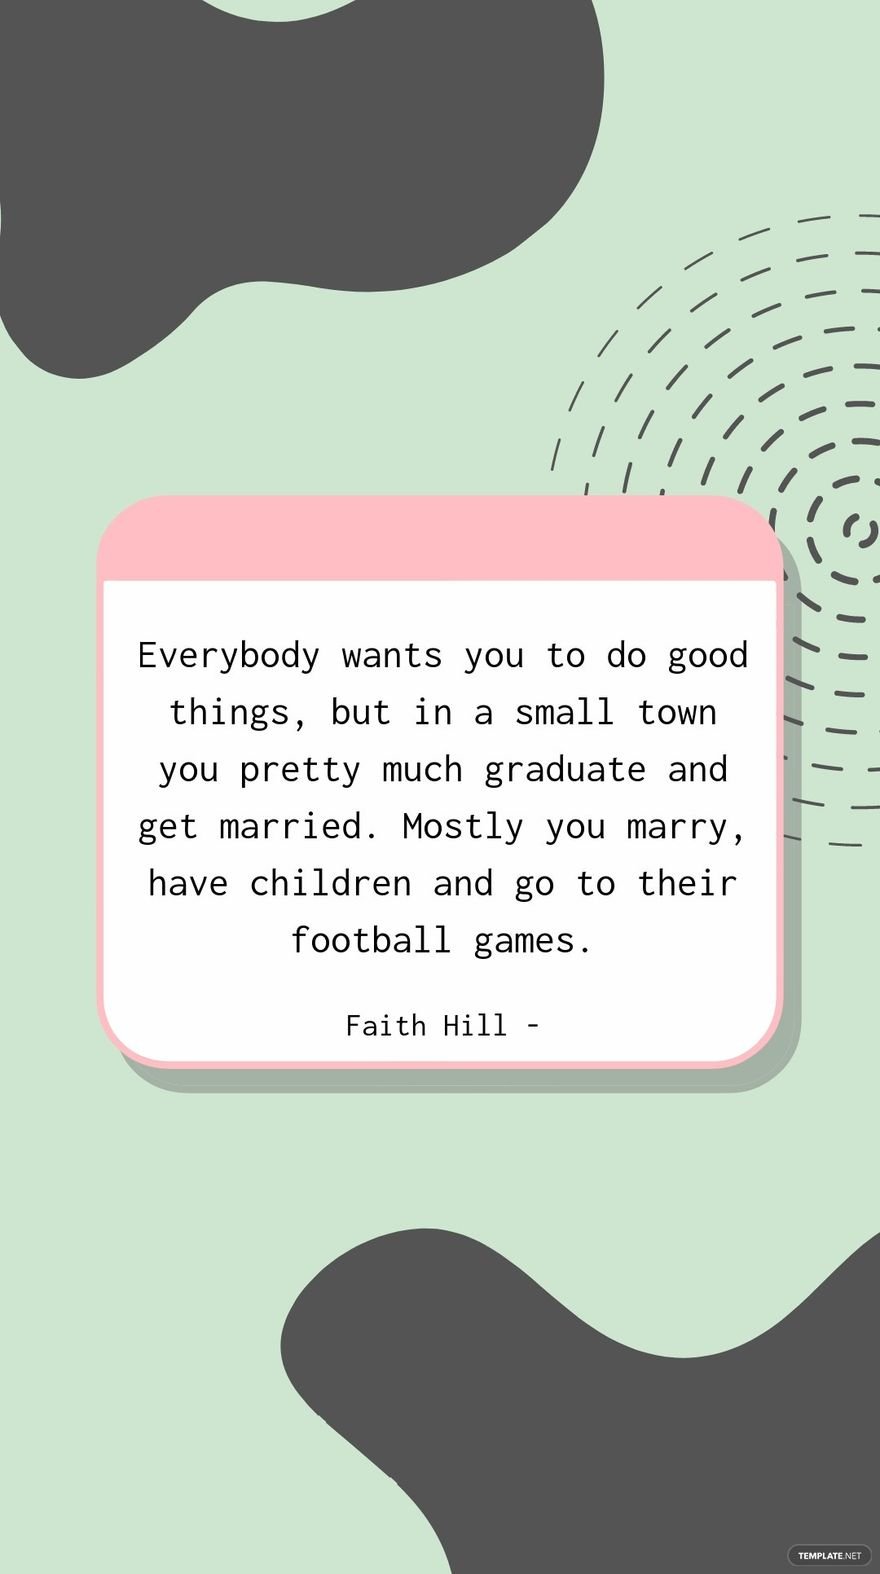 Faith Hill - Everybody wants you to do good things, but in a small town you pretty much graduate and get married. Mostly you marry, have children and go to their football games.